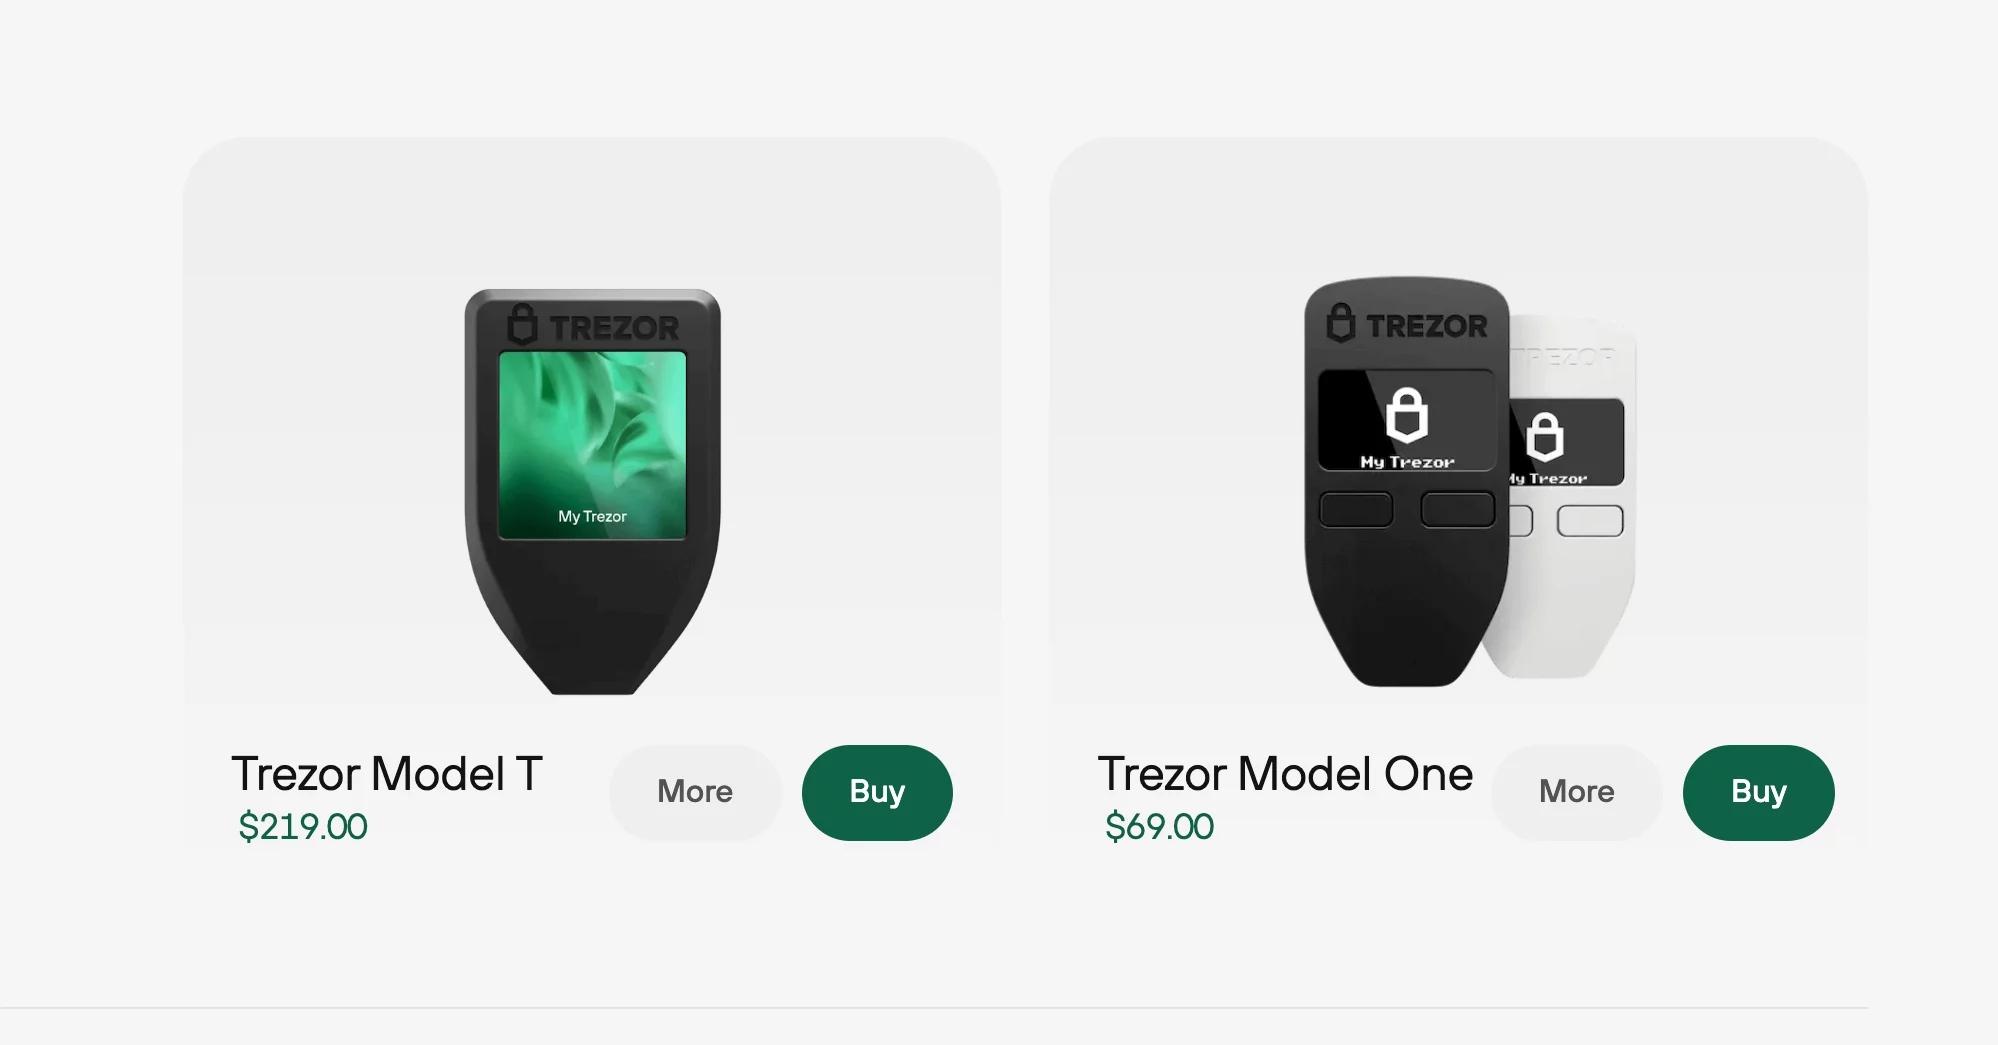 Getting Started with TREZOR